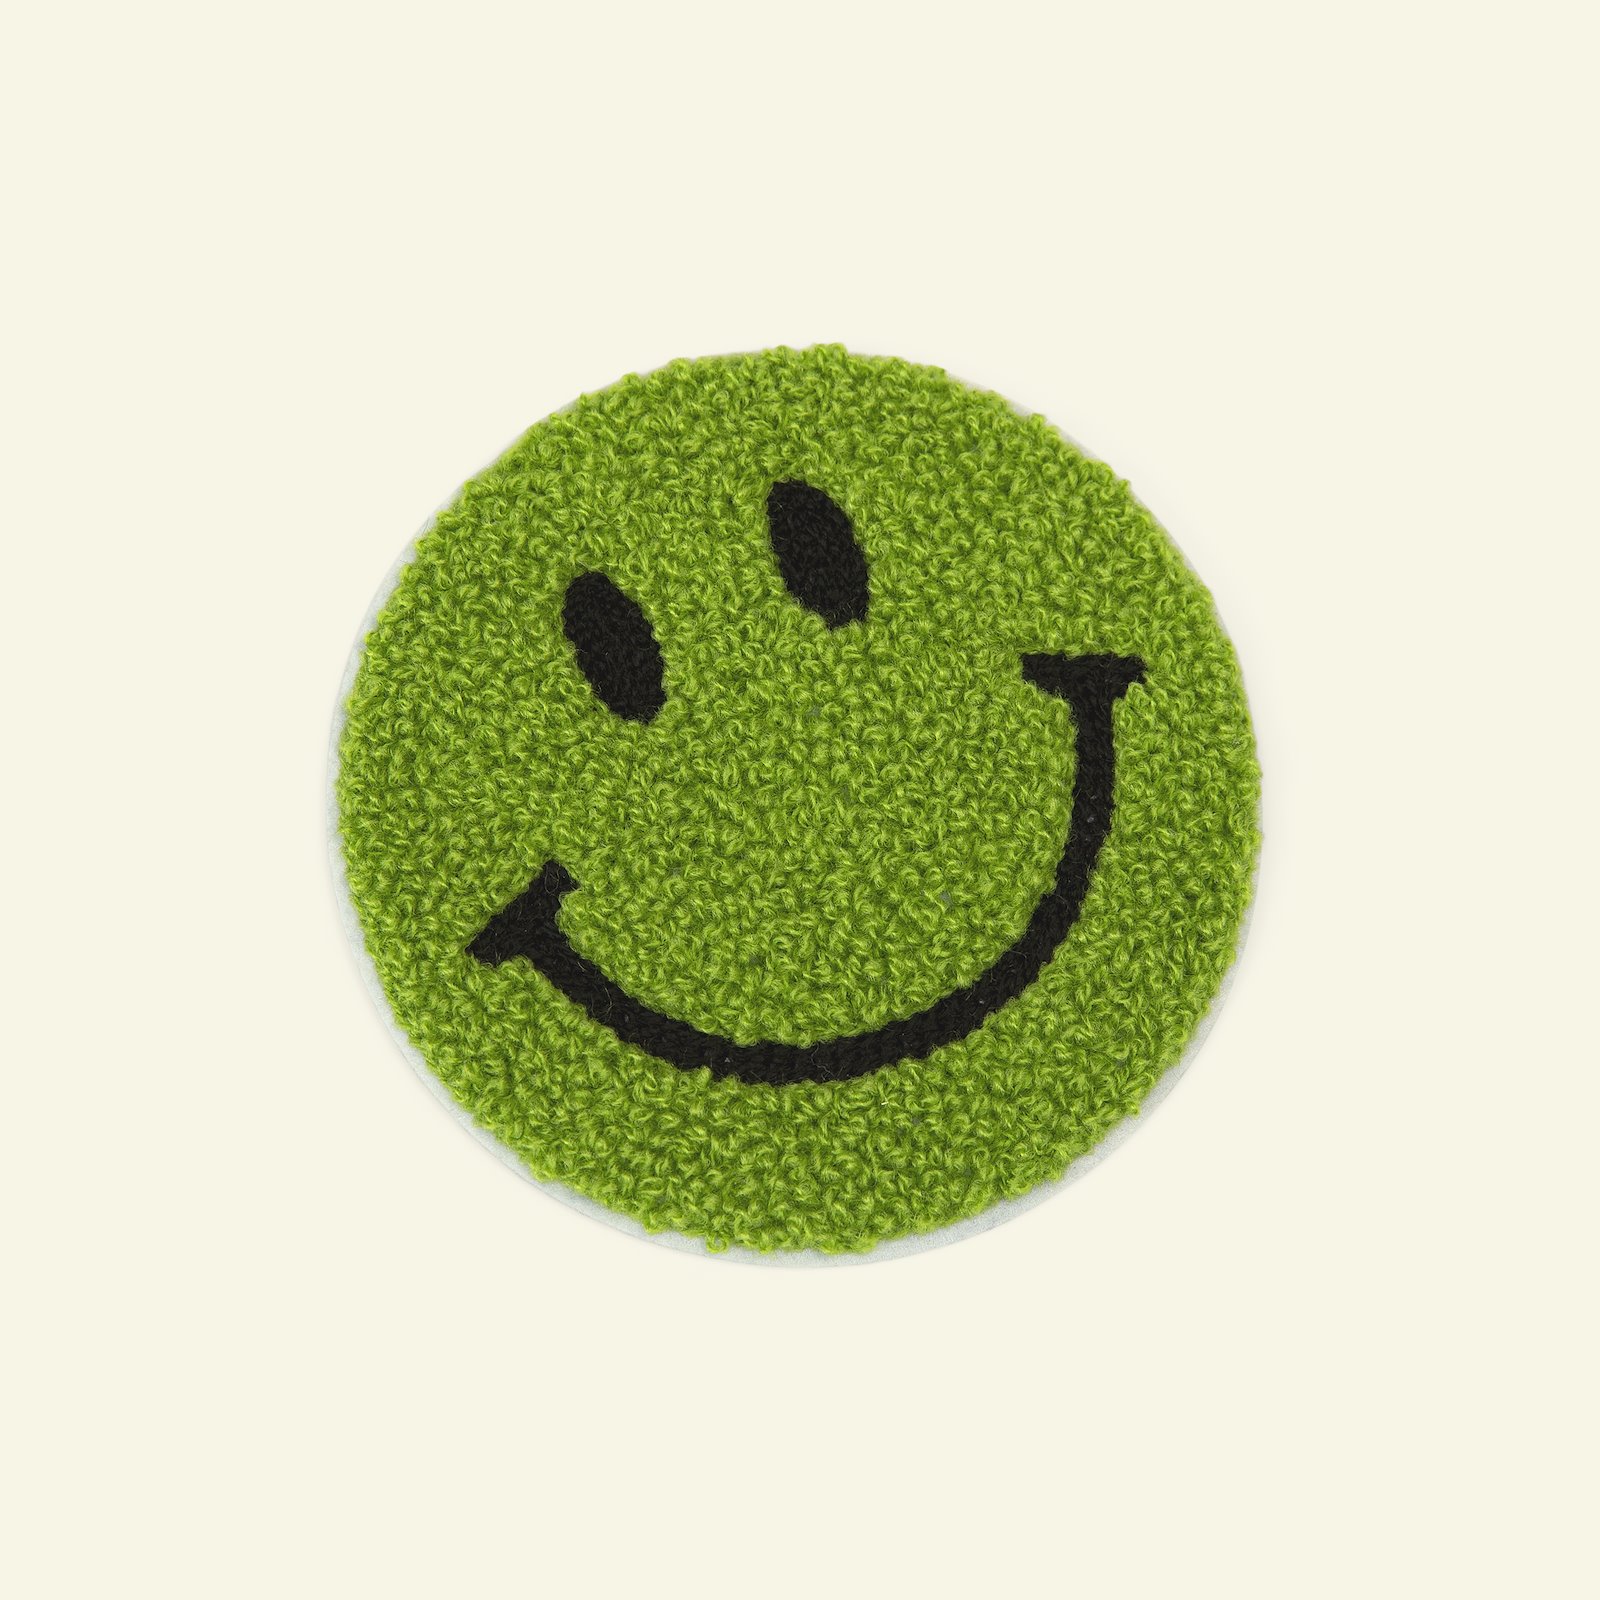 Patch smiley 9,5cm green 1pcs 24927_pack